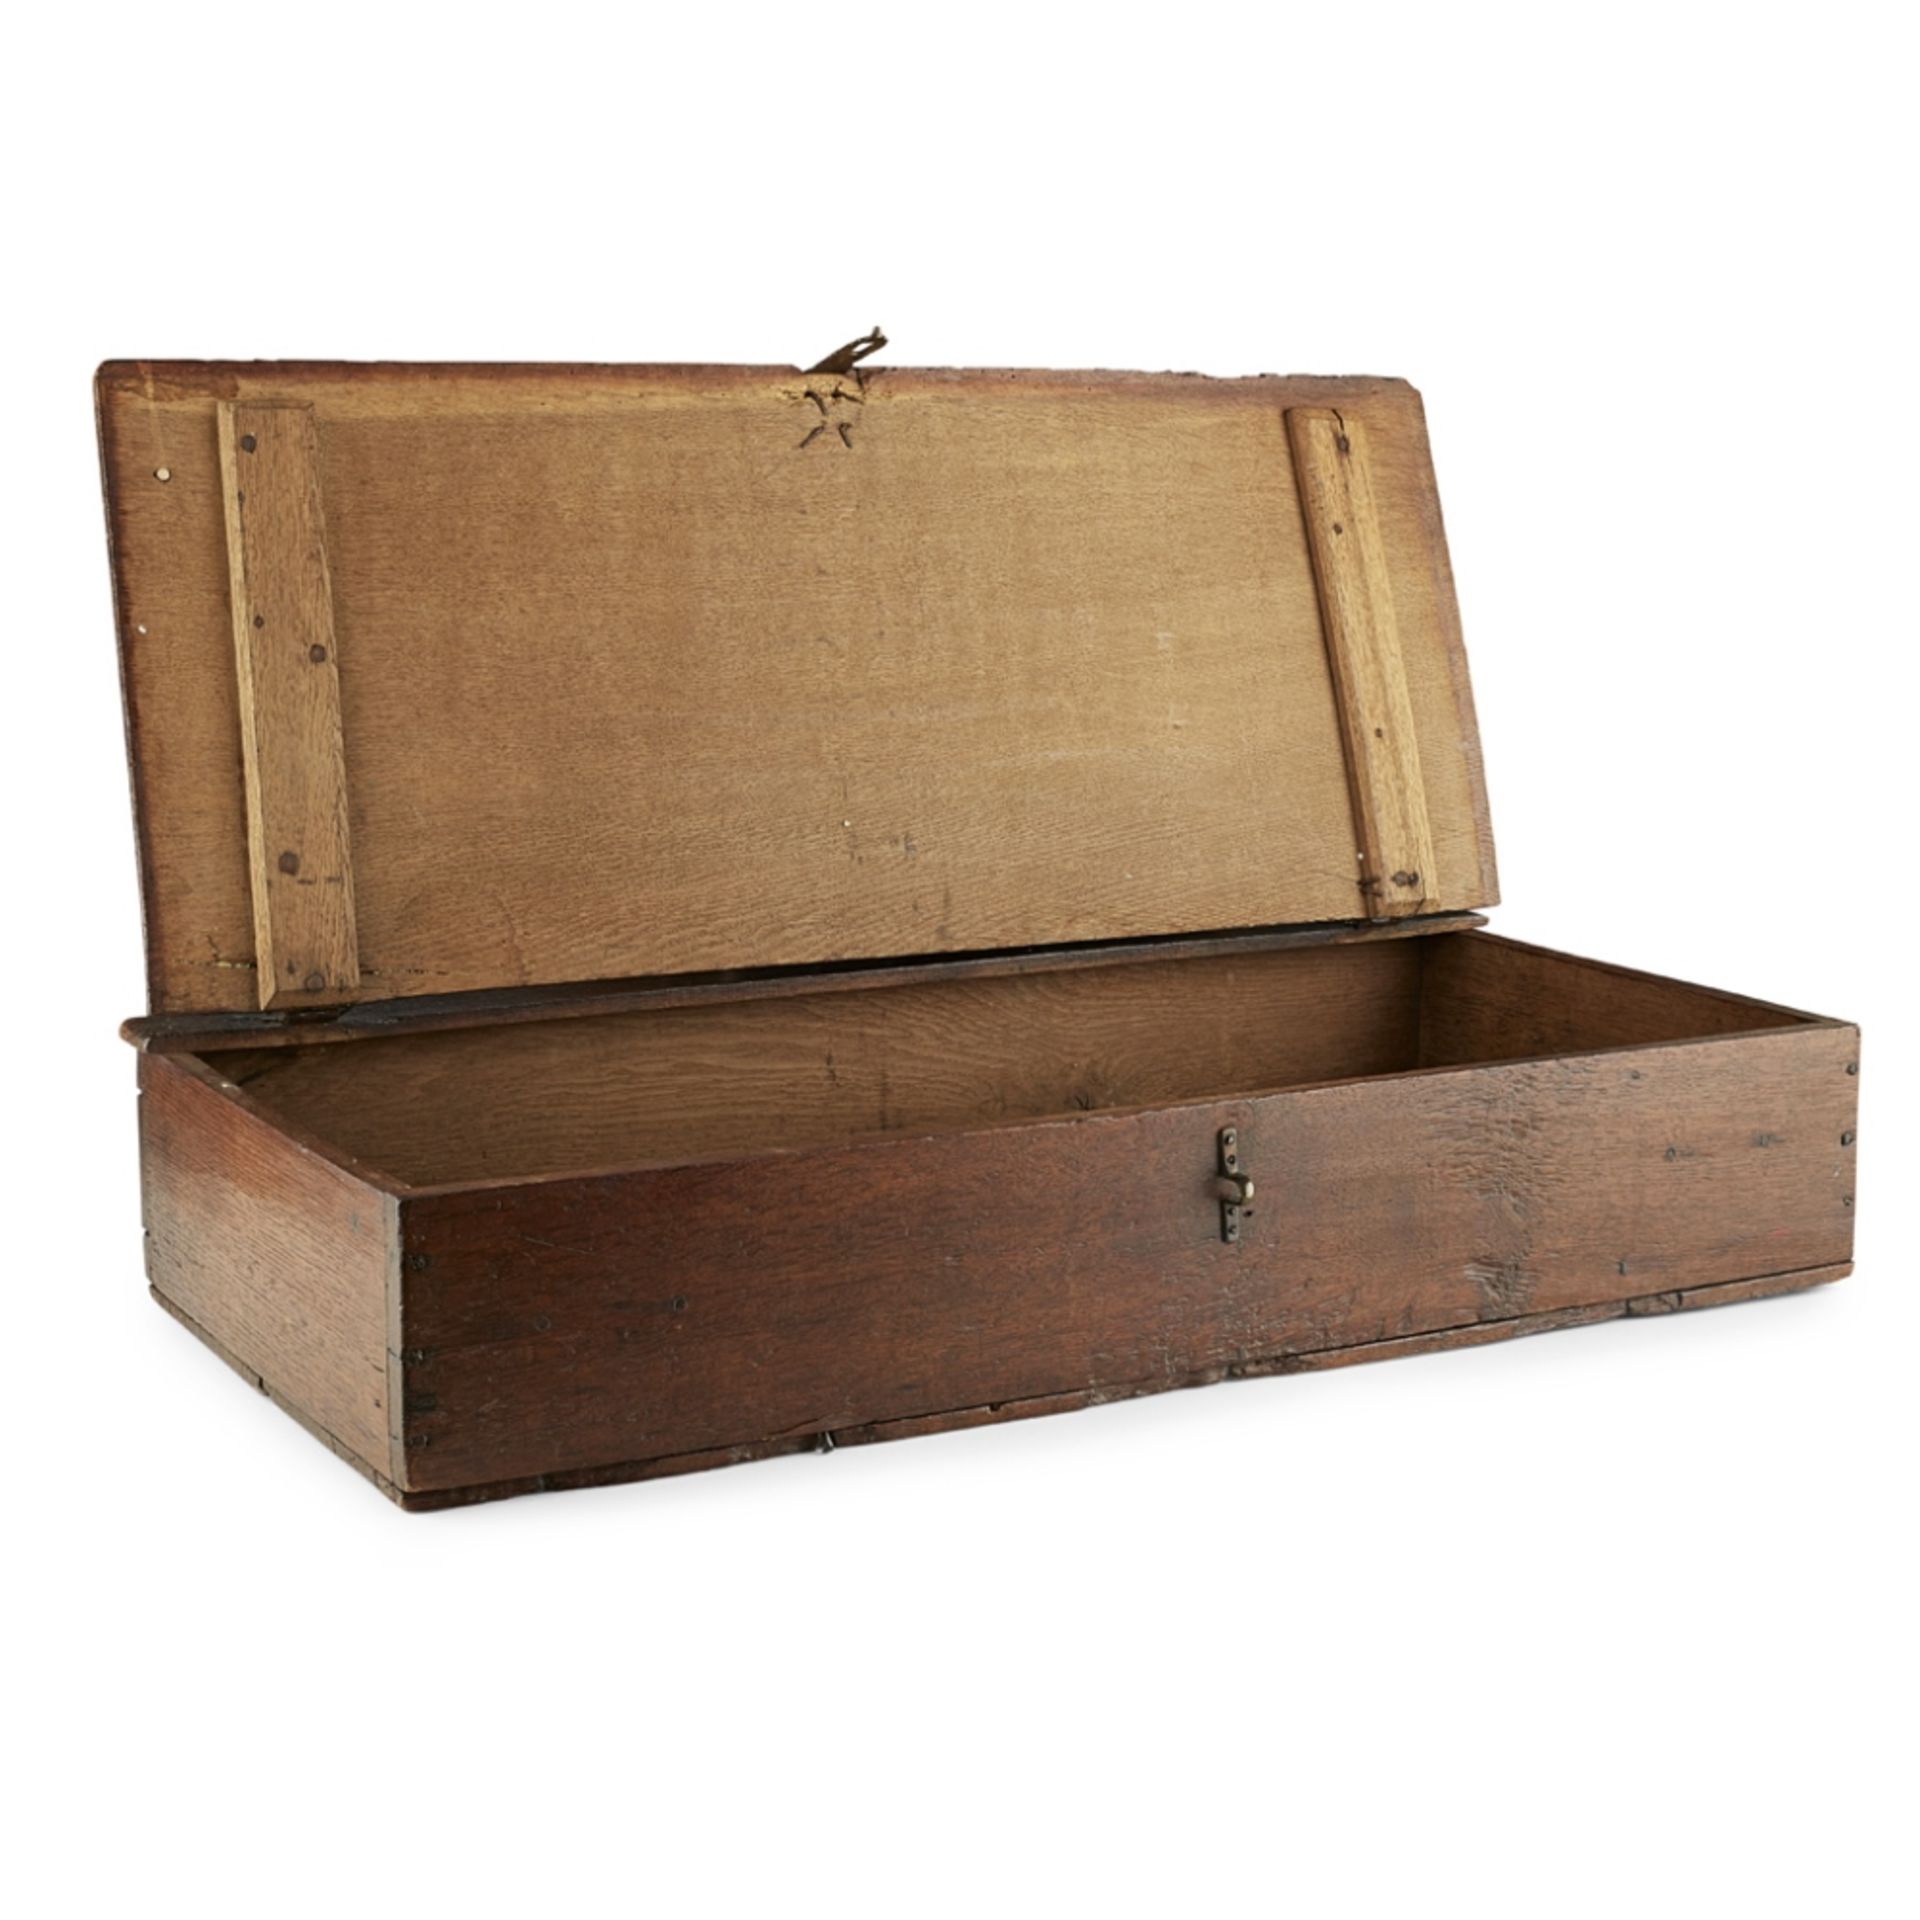 DUTCH OAK DEED/DOCUMENTS BOX18TH CENTURY of rectangular form, with brass clasp and iron hinges, - Image 2 of 2